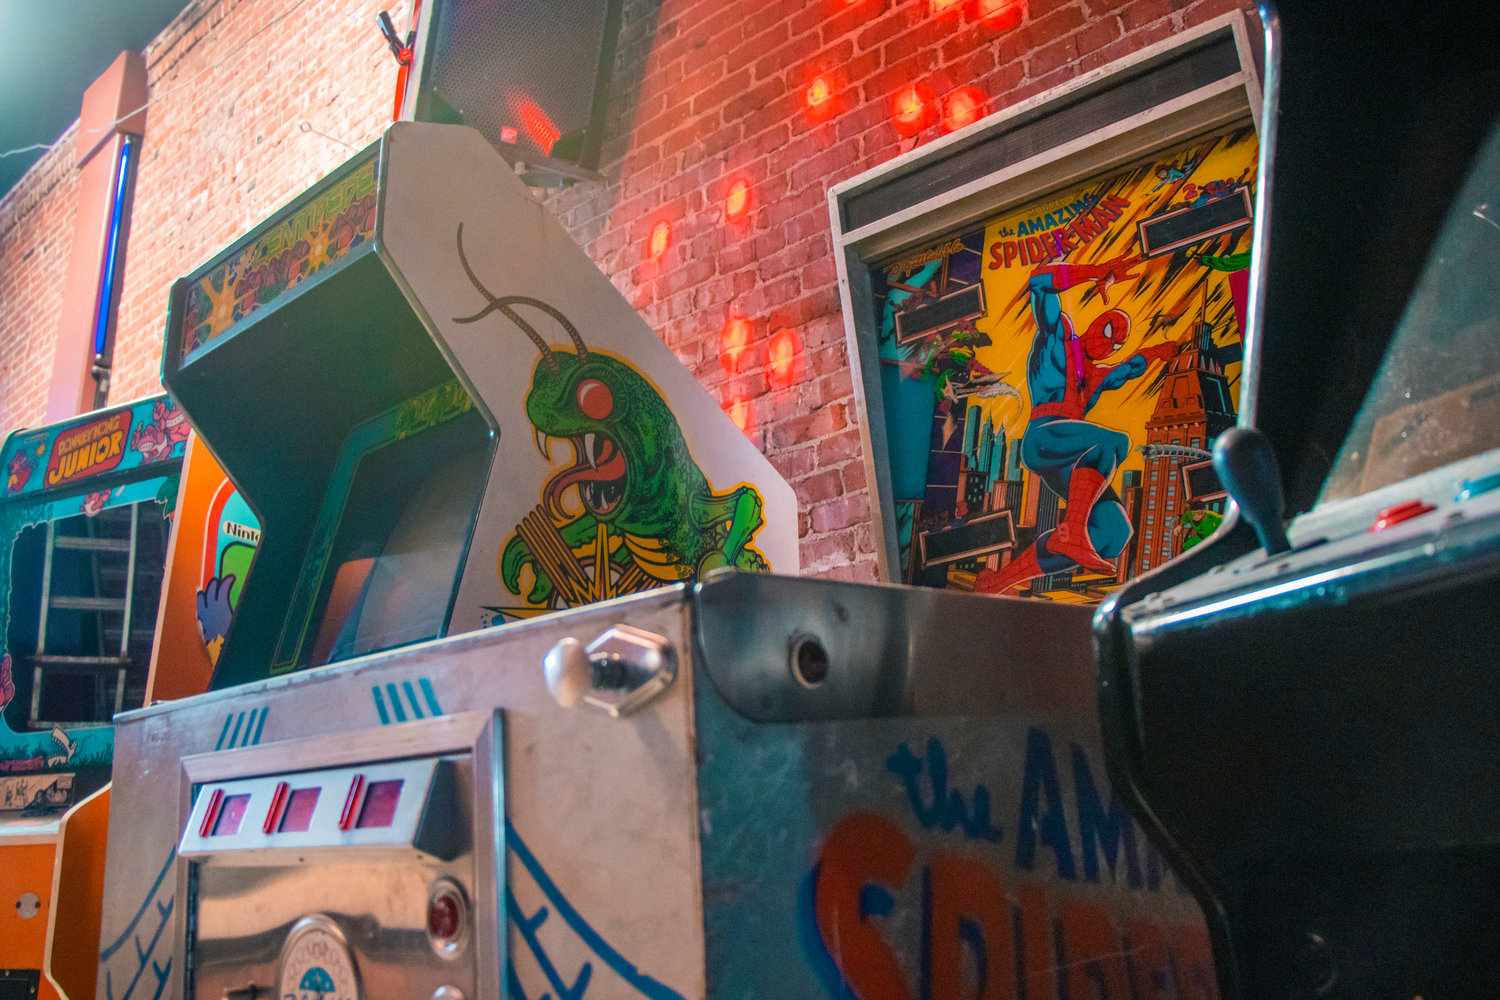 Vintage arcade and pinball games are on display inside the Insert Coin bar in Centralia.